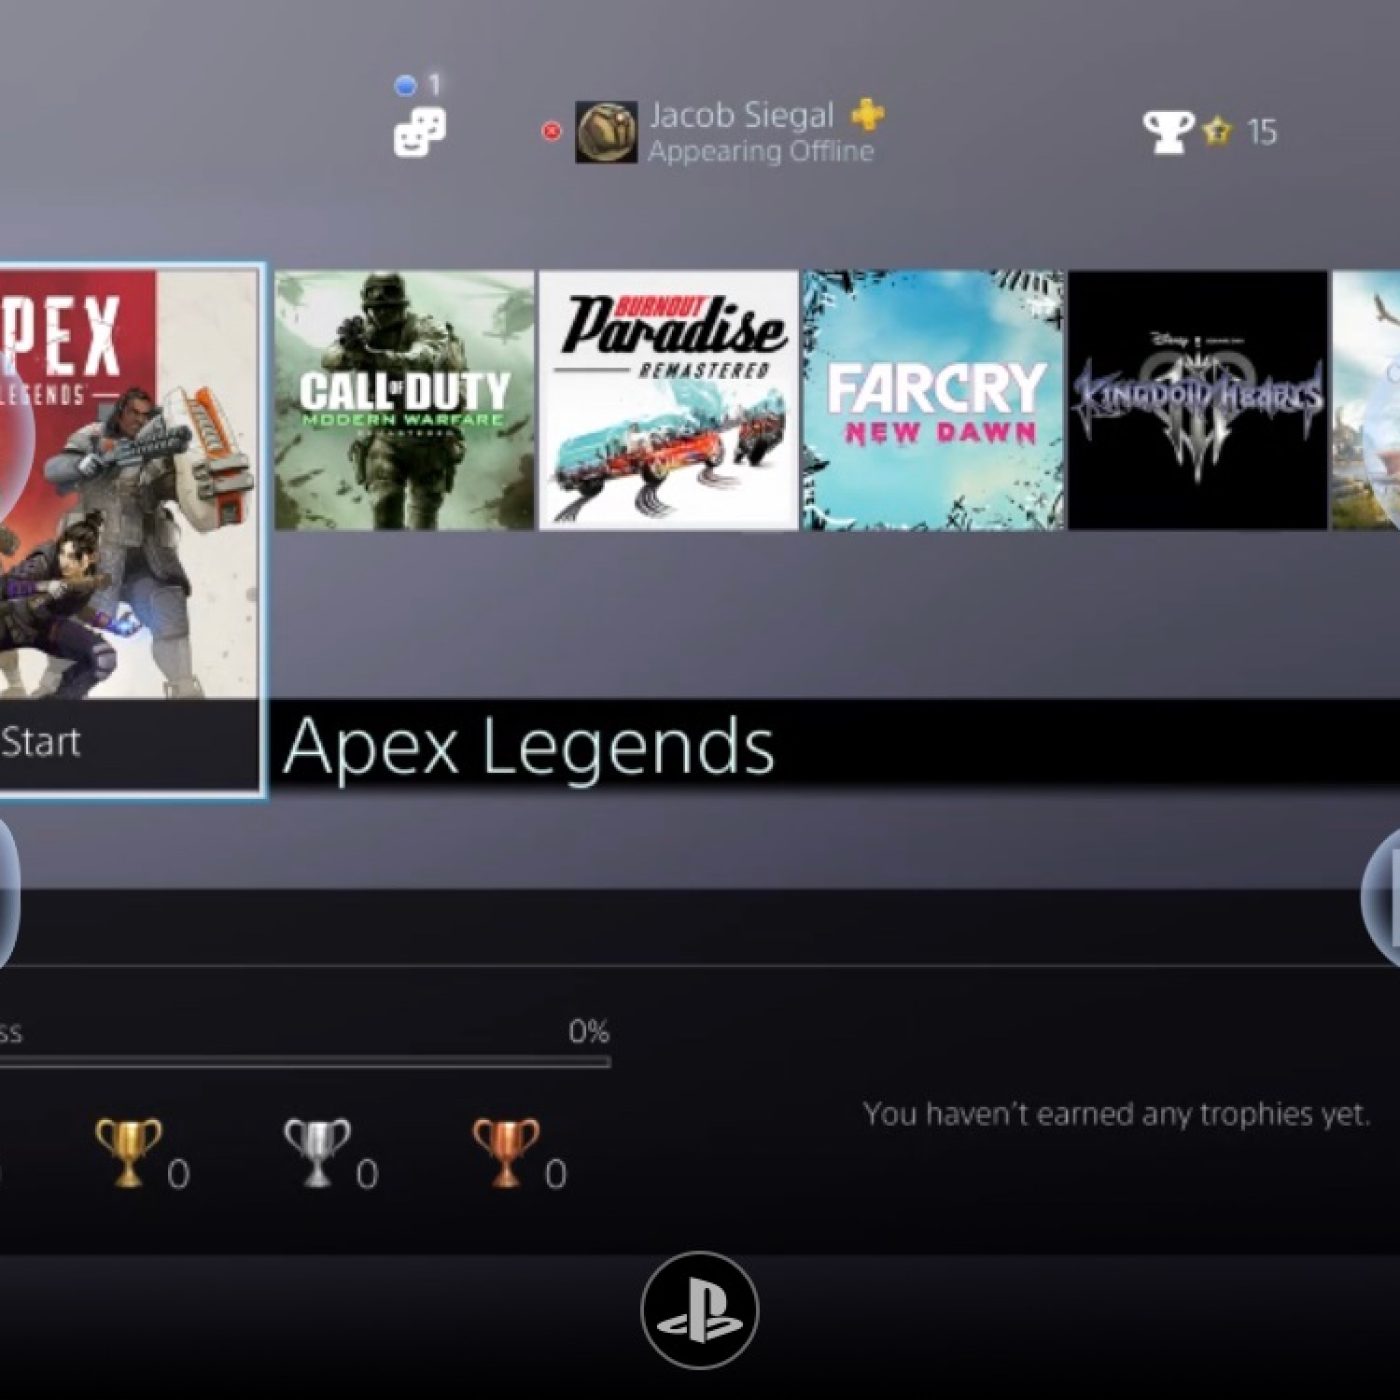 Sony finally lets stream games to your iPhone and iPad